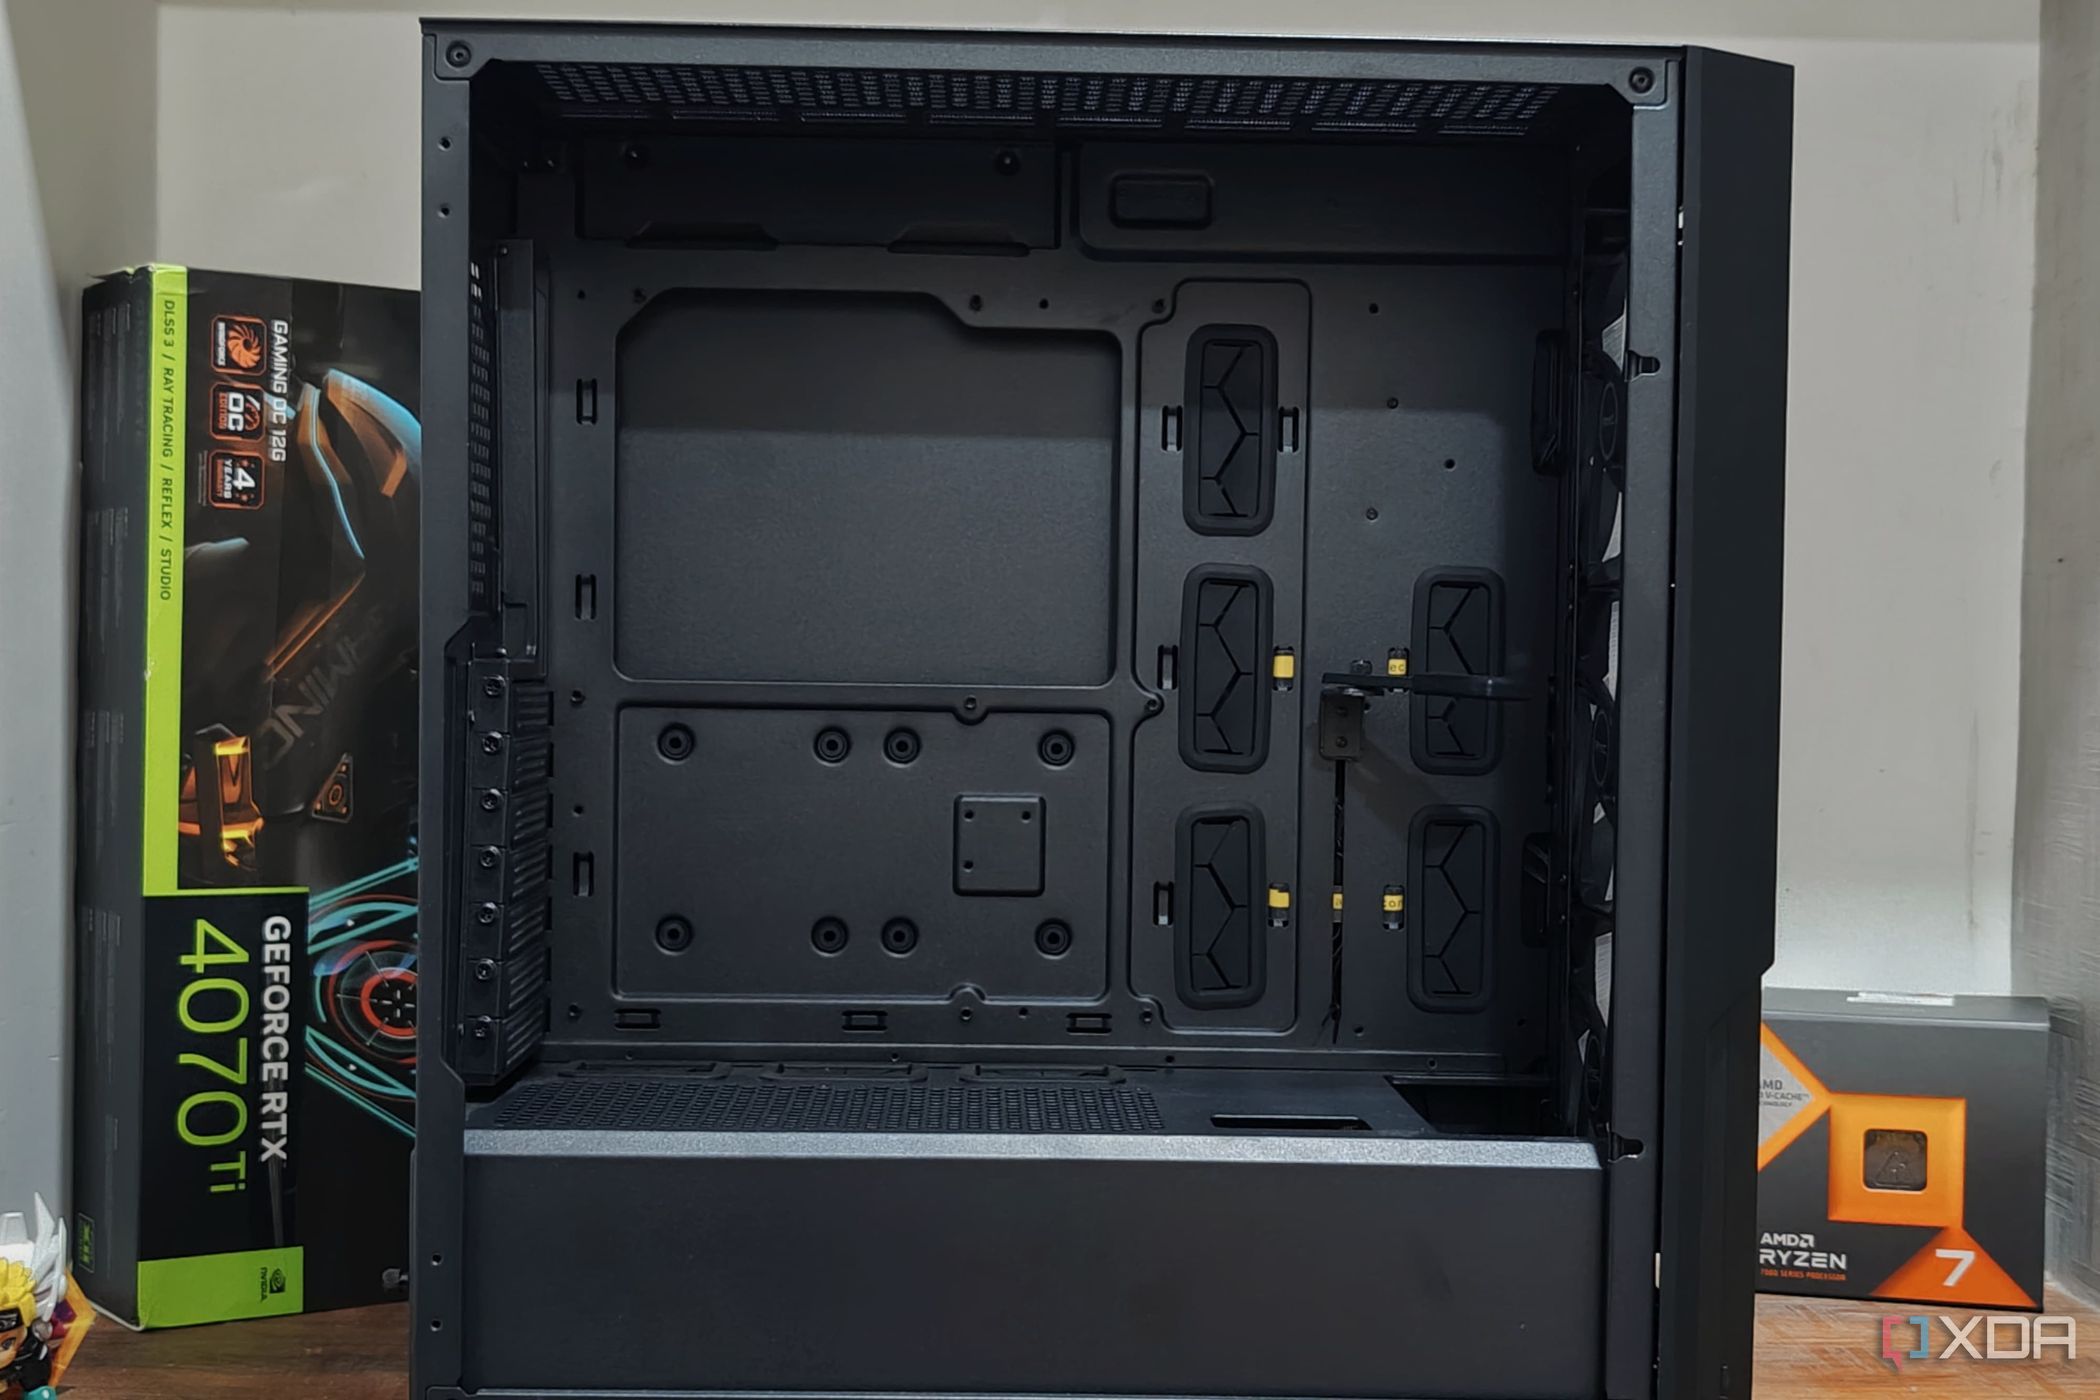 5 myths about building PCs that still exist in one way or another